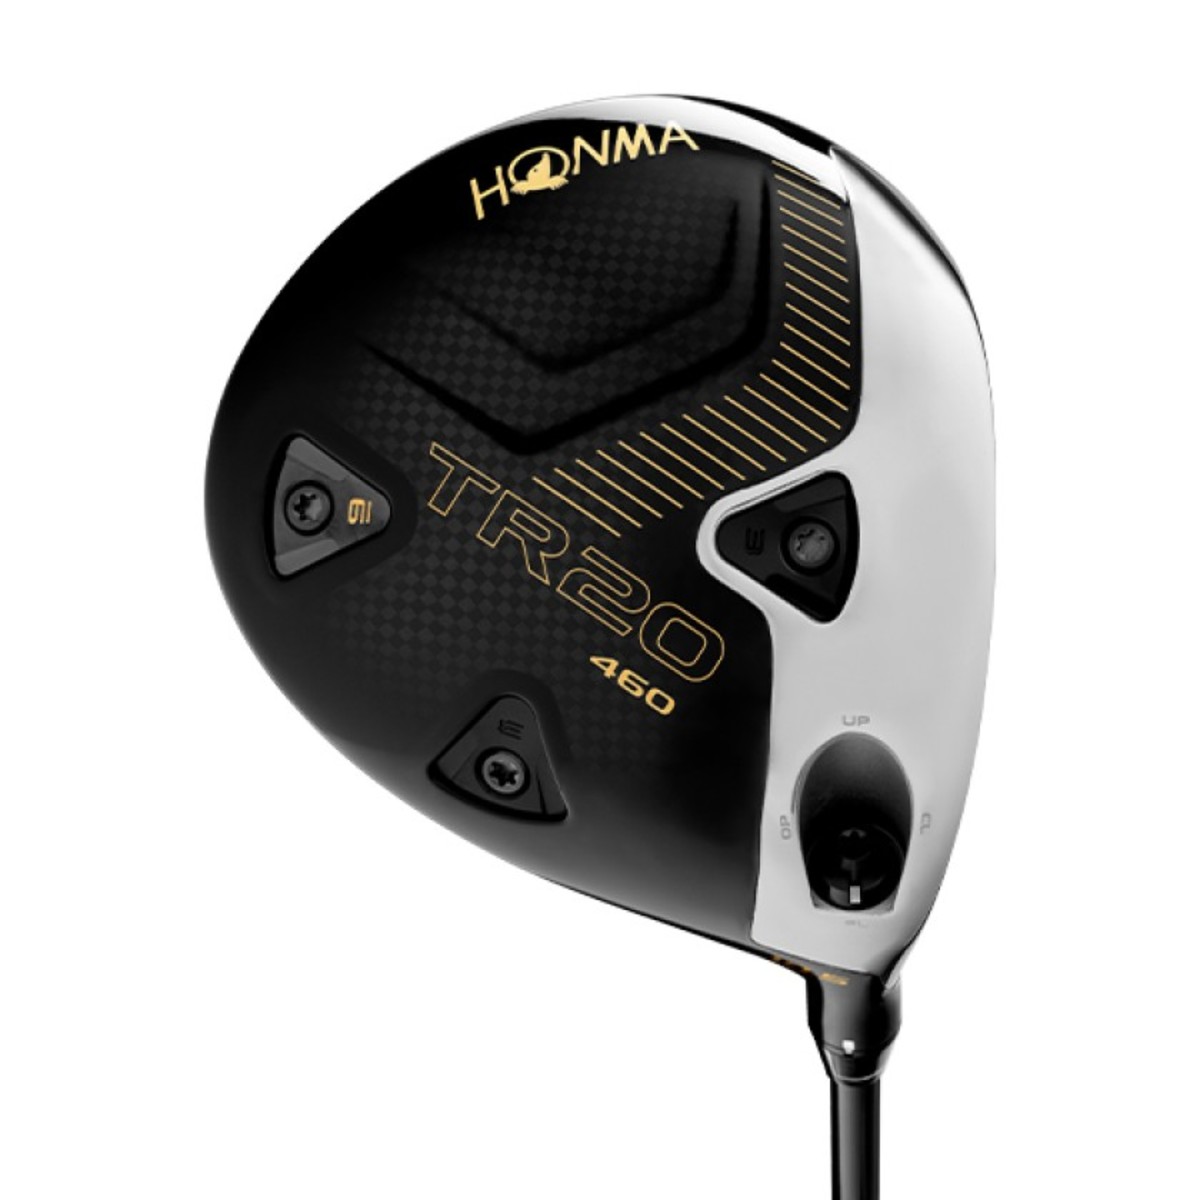 Honma Golf's TR20 driver is light and is built to promote faster swings. The minimalistic sole design features three adjustable weights that are designed for specific purpose.